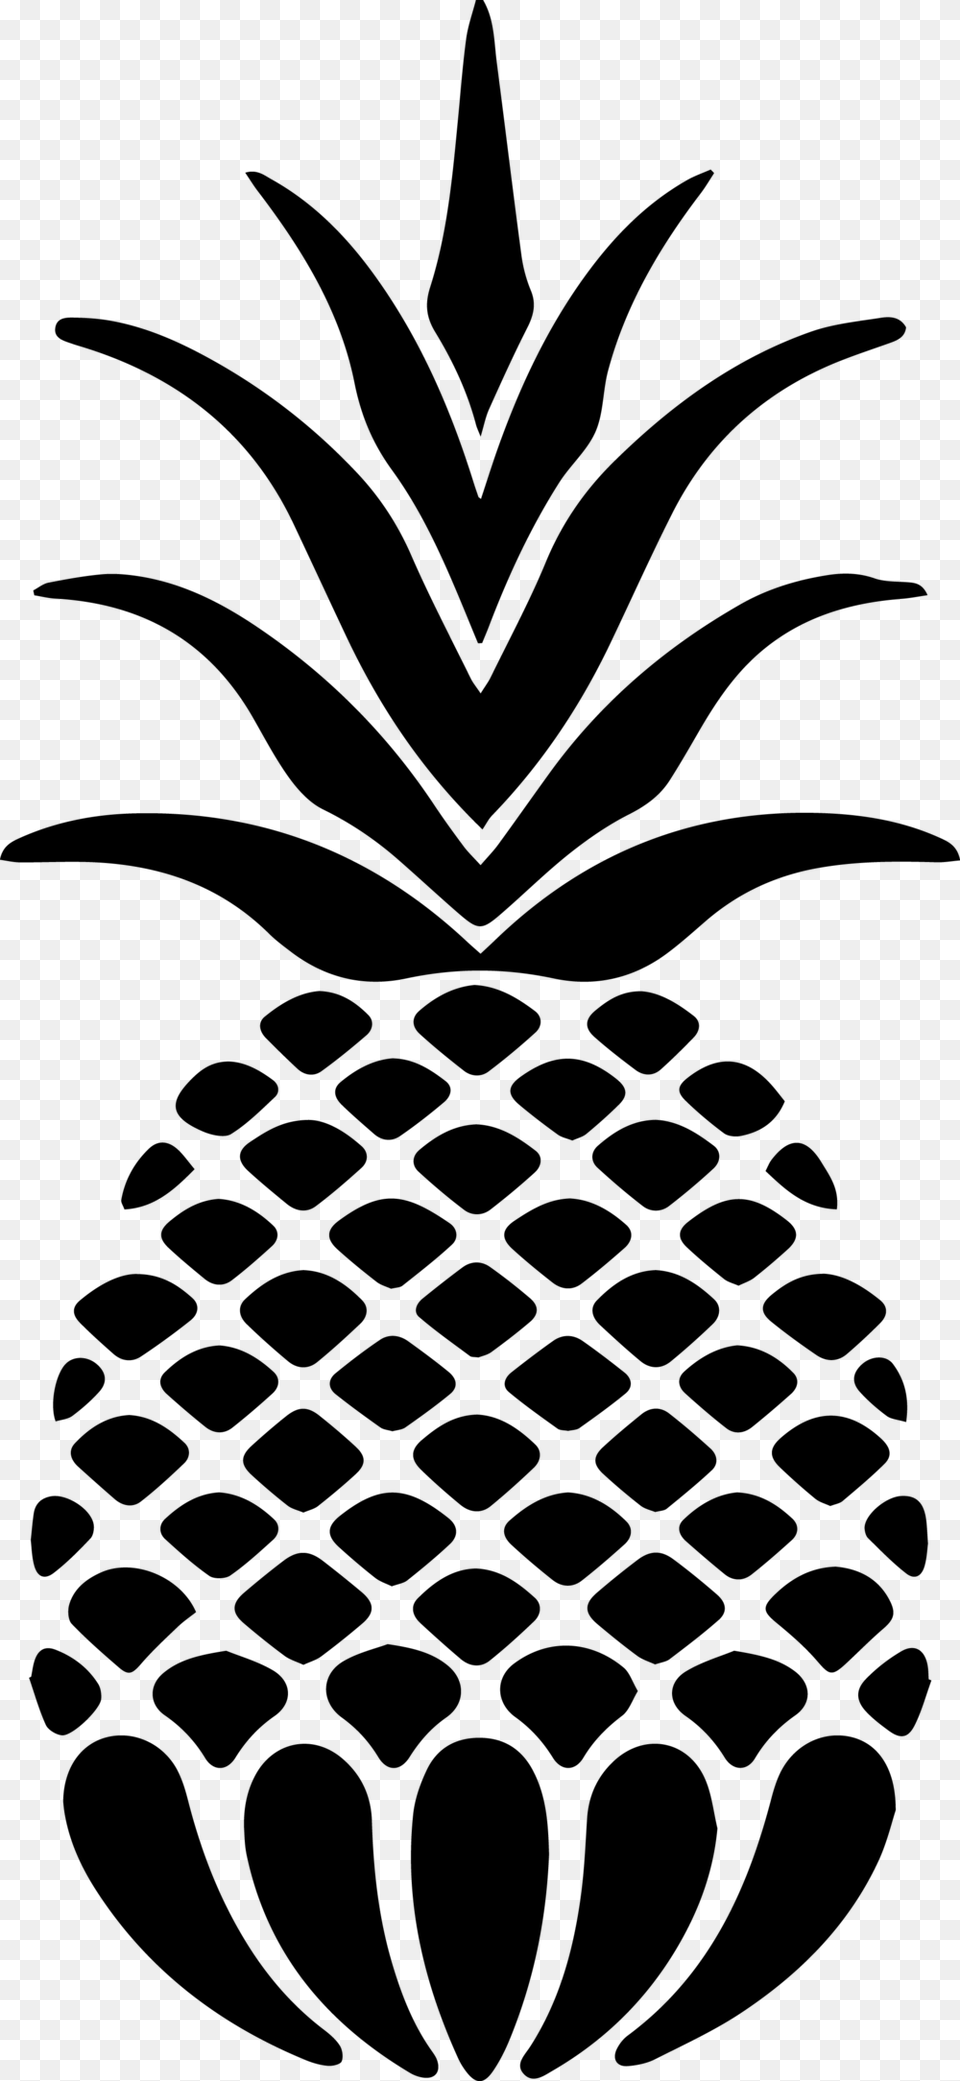 Transparent Pineapple Drawing Pineapple Black And White, Gray Free Png